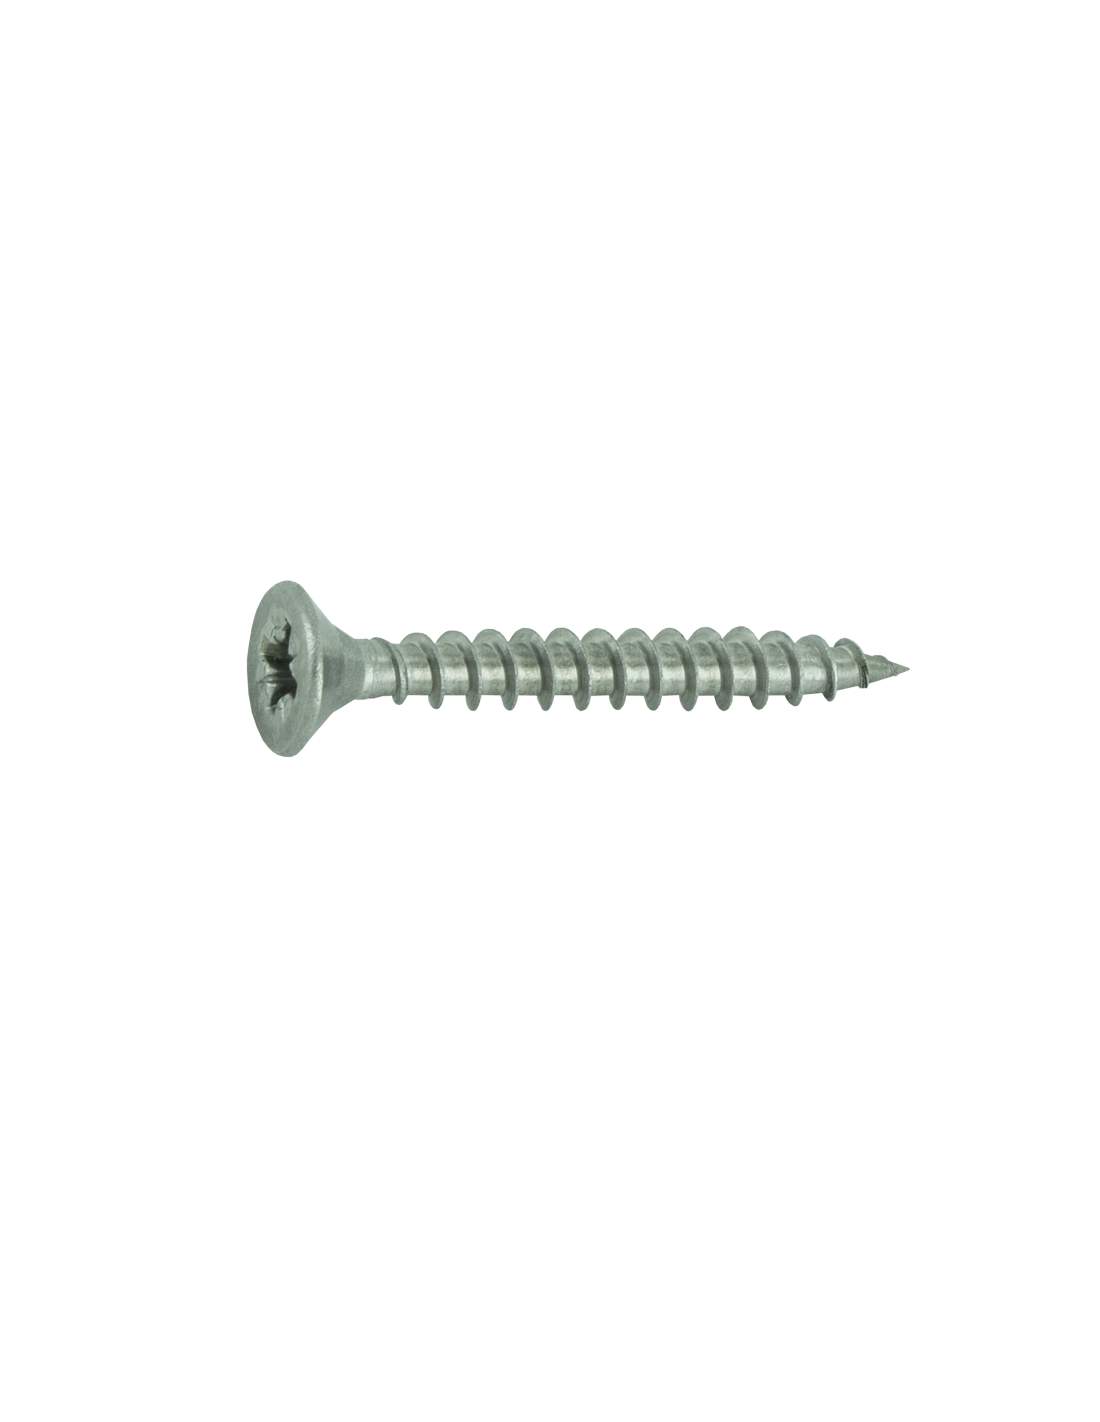 Agglo countersunk Pozidriv stainless steel screws A2 6x80, 5 pcs.